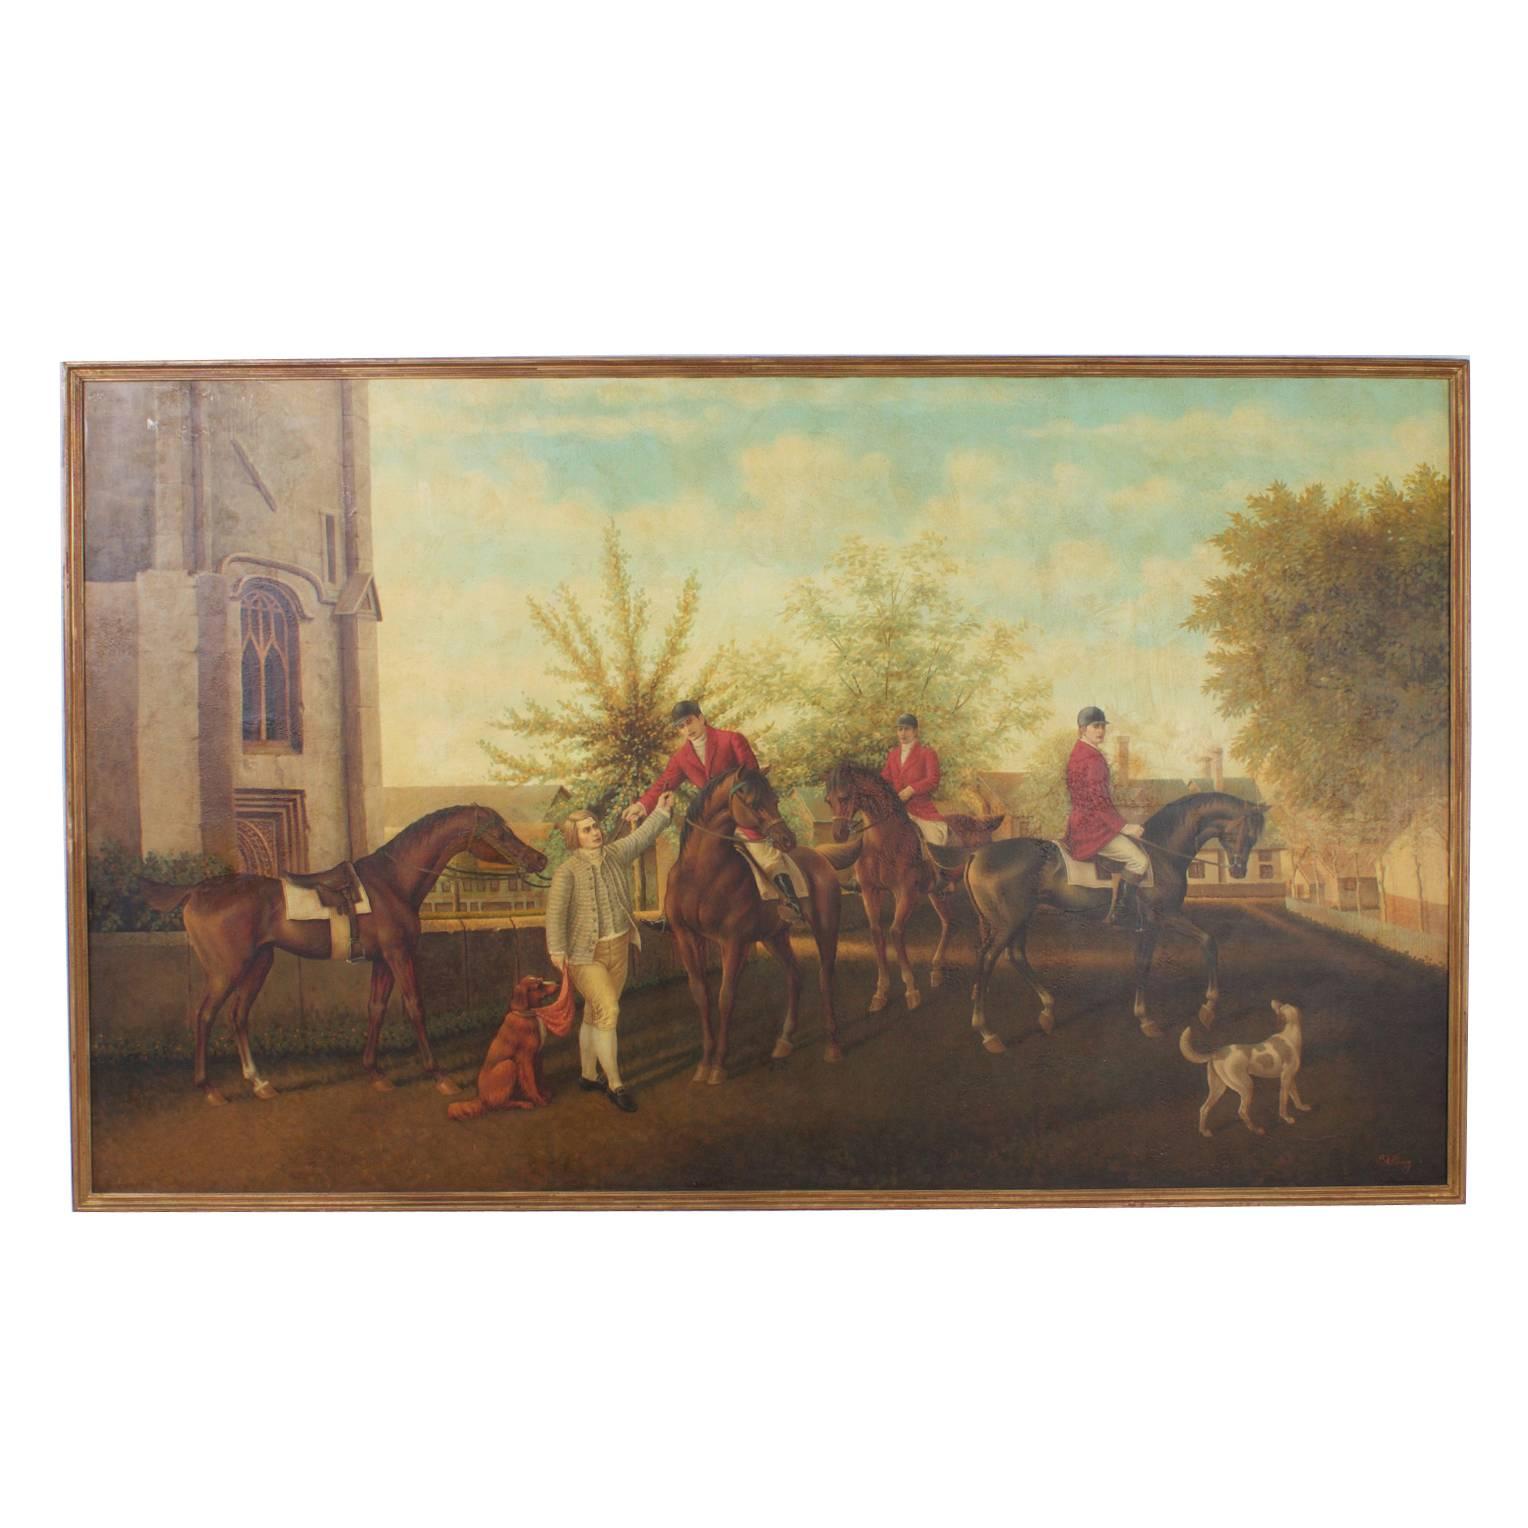 Large Oil on Canvas Hunt Party Scene by William Skilling